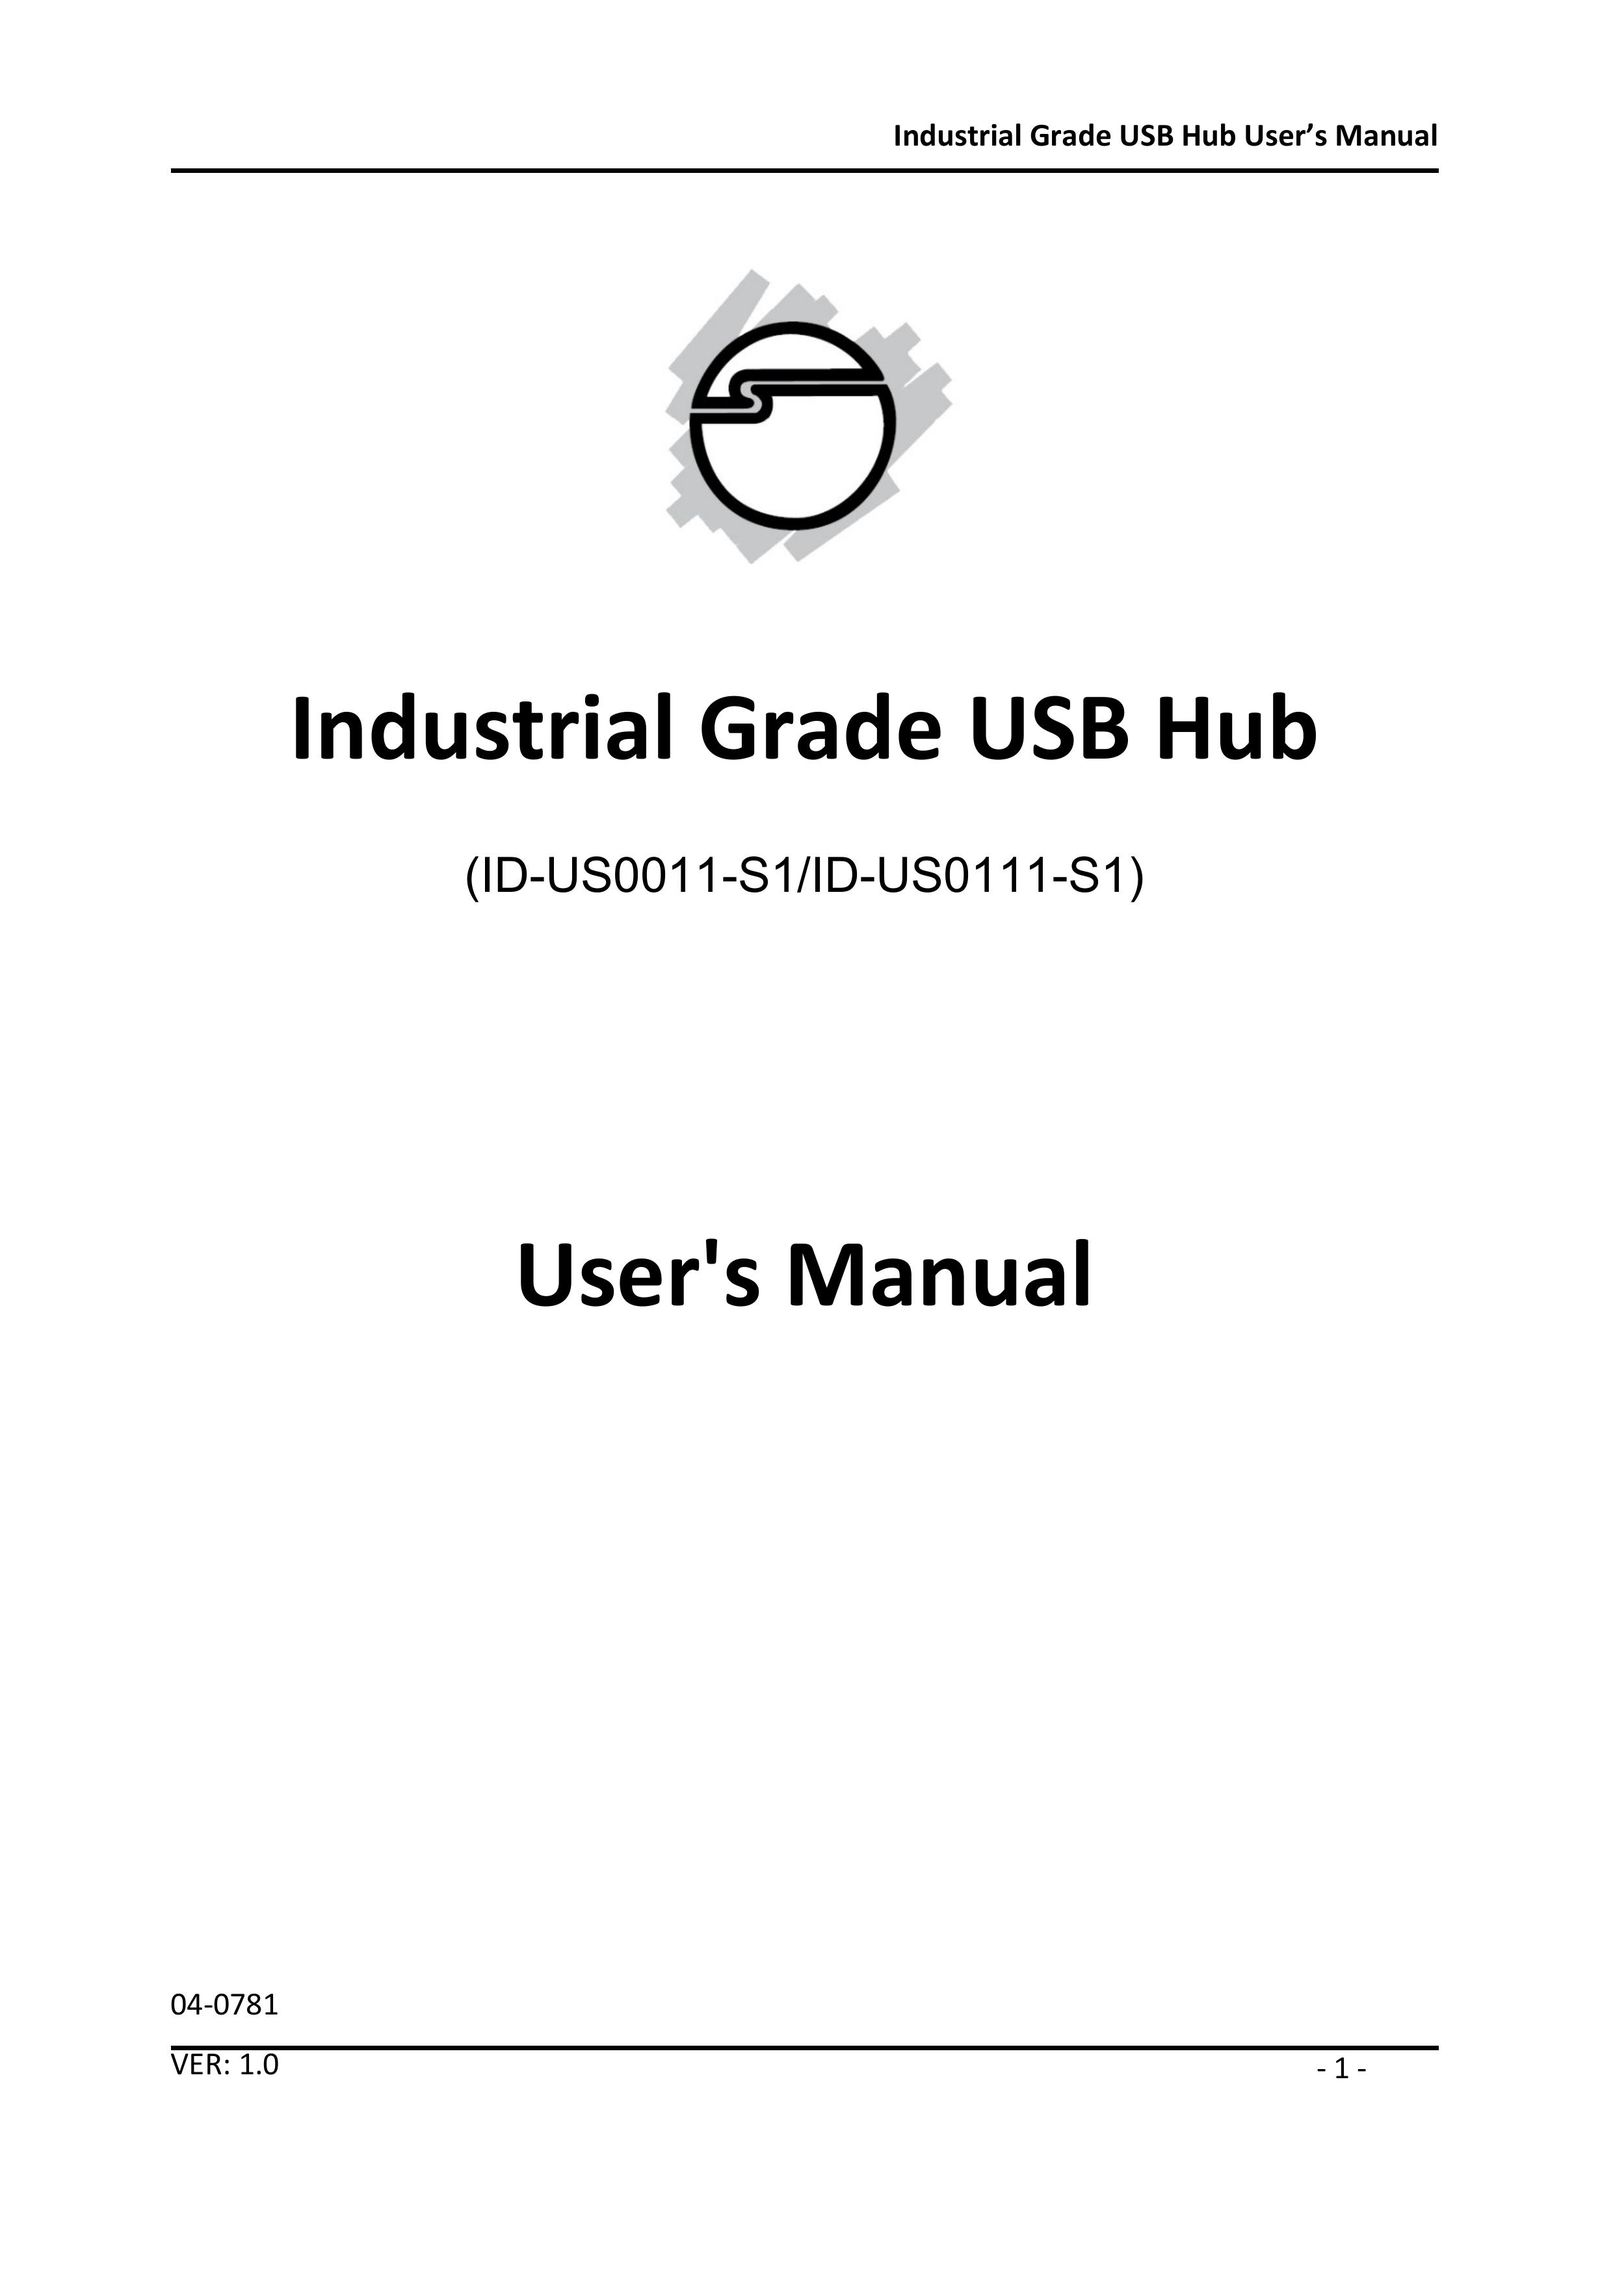 SIIG ID-US0111-S1 Switch User Manual